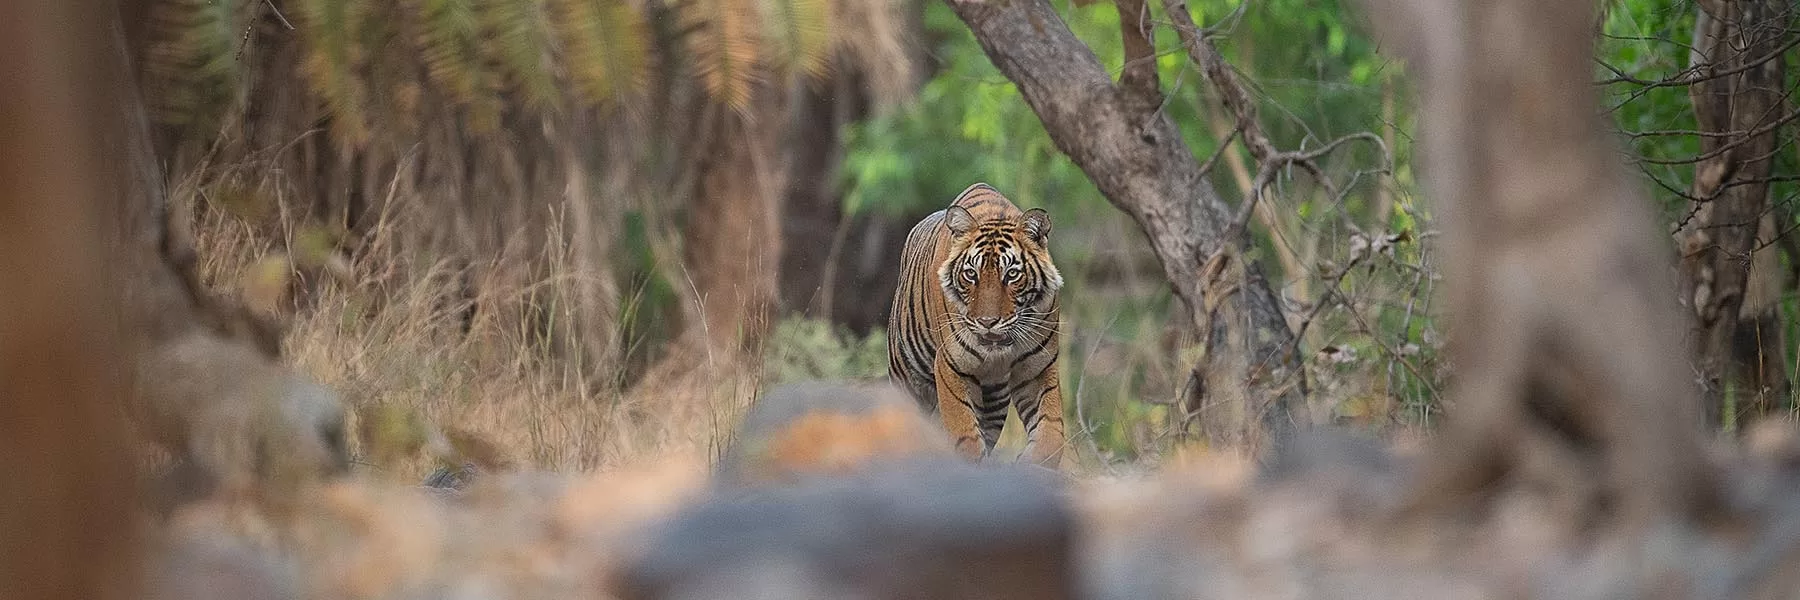 10 destinations to spot tigers in India